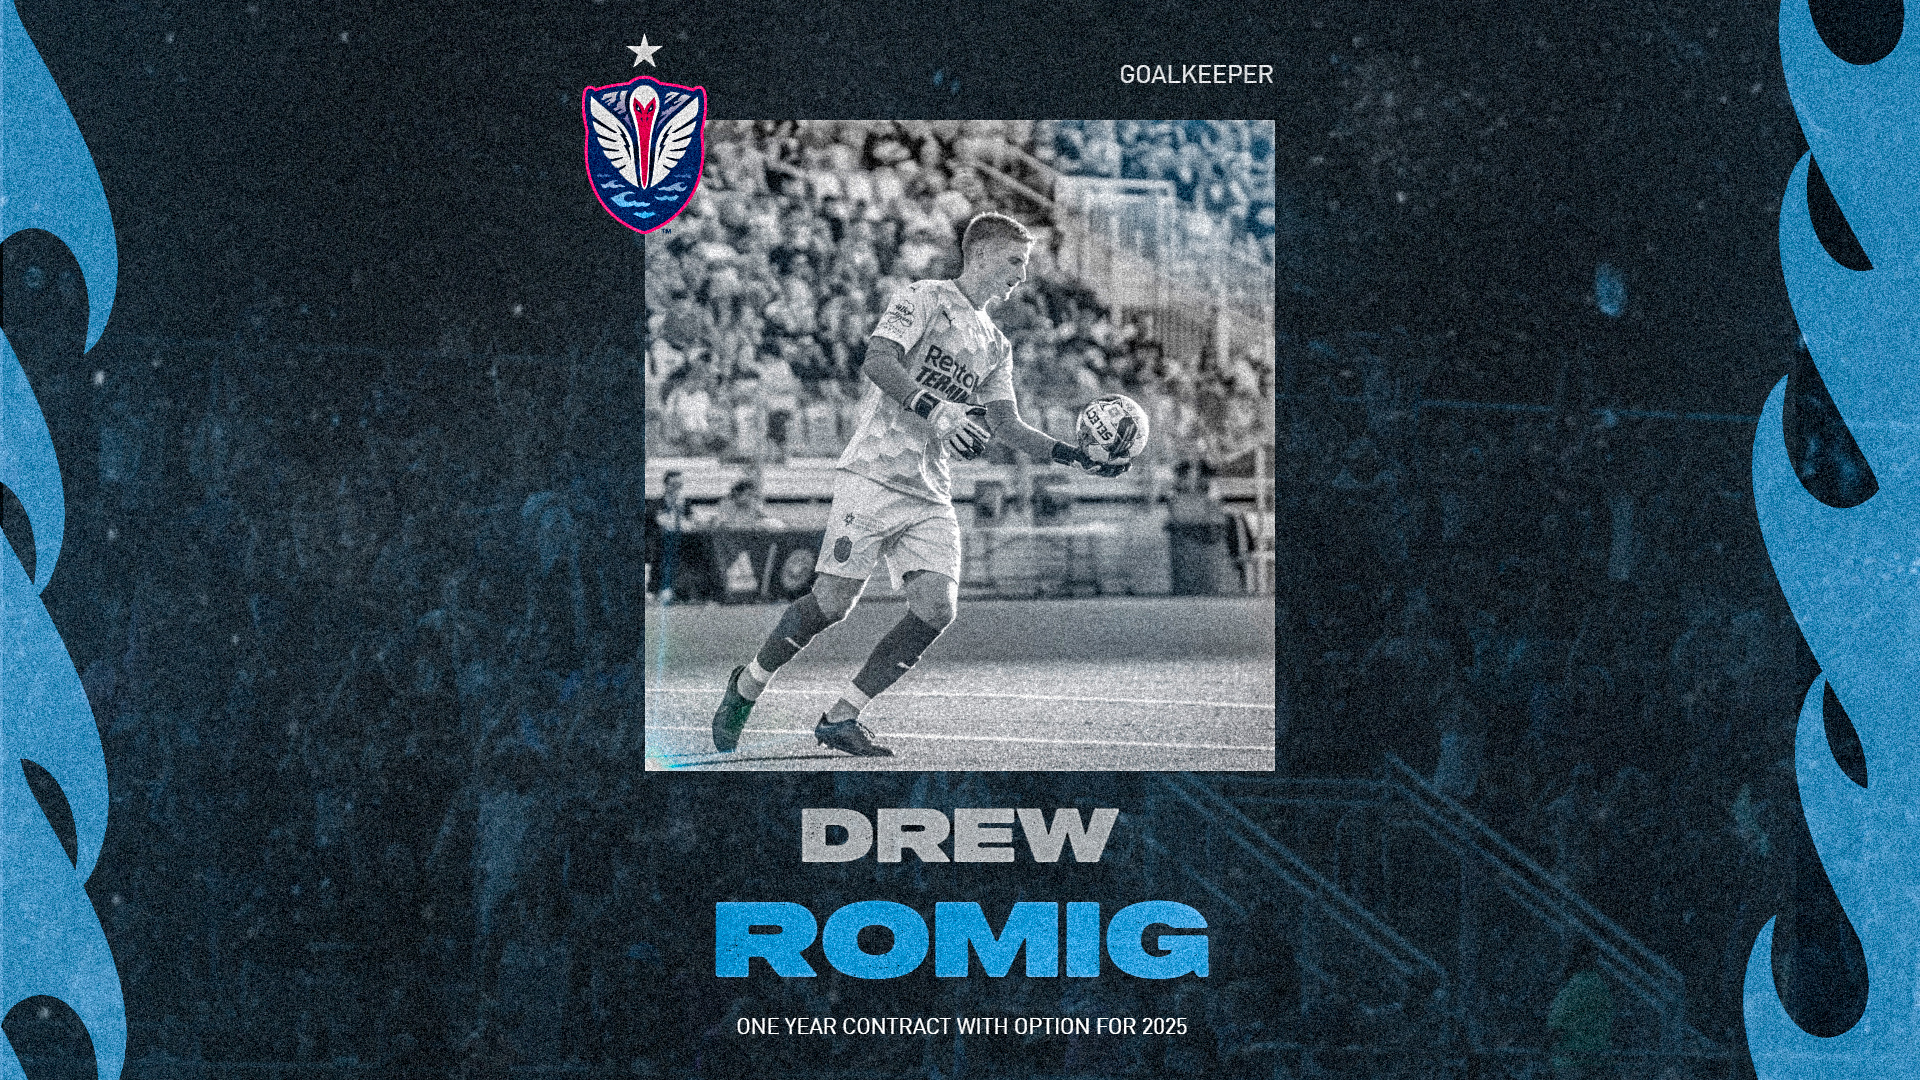 South Georgia Tormenta FC announces Drew Romig on One-Year Contract with Option for 2025 featured image